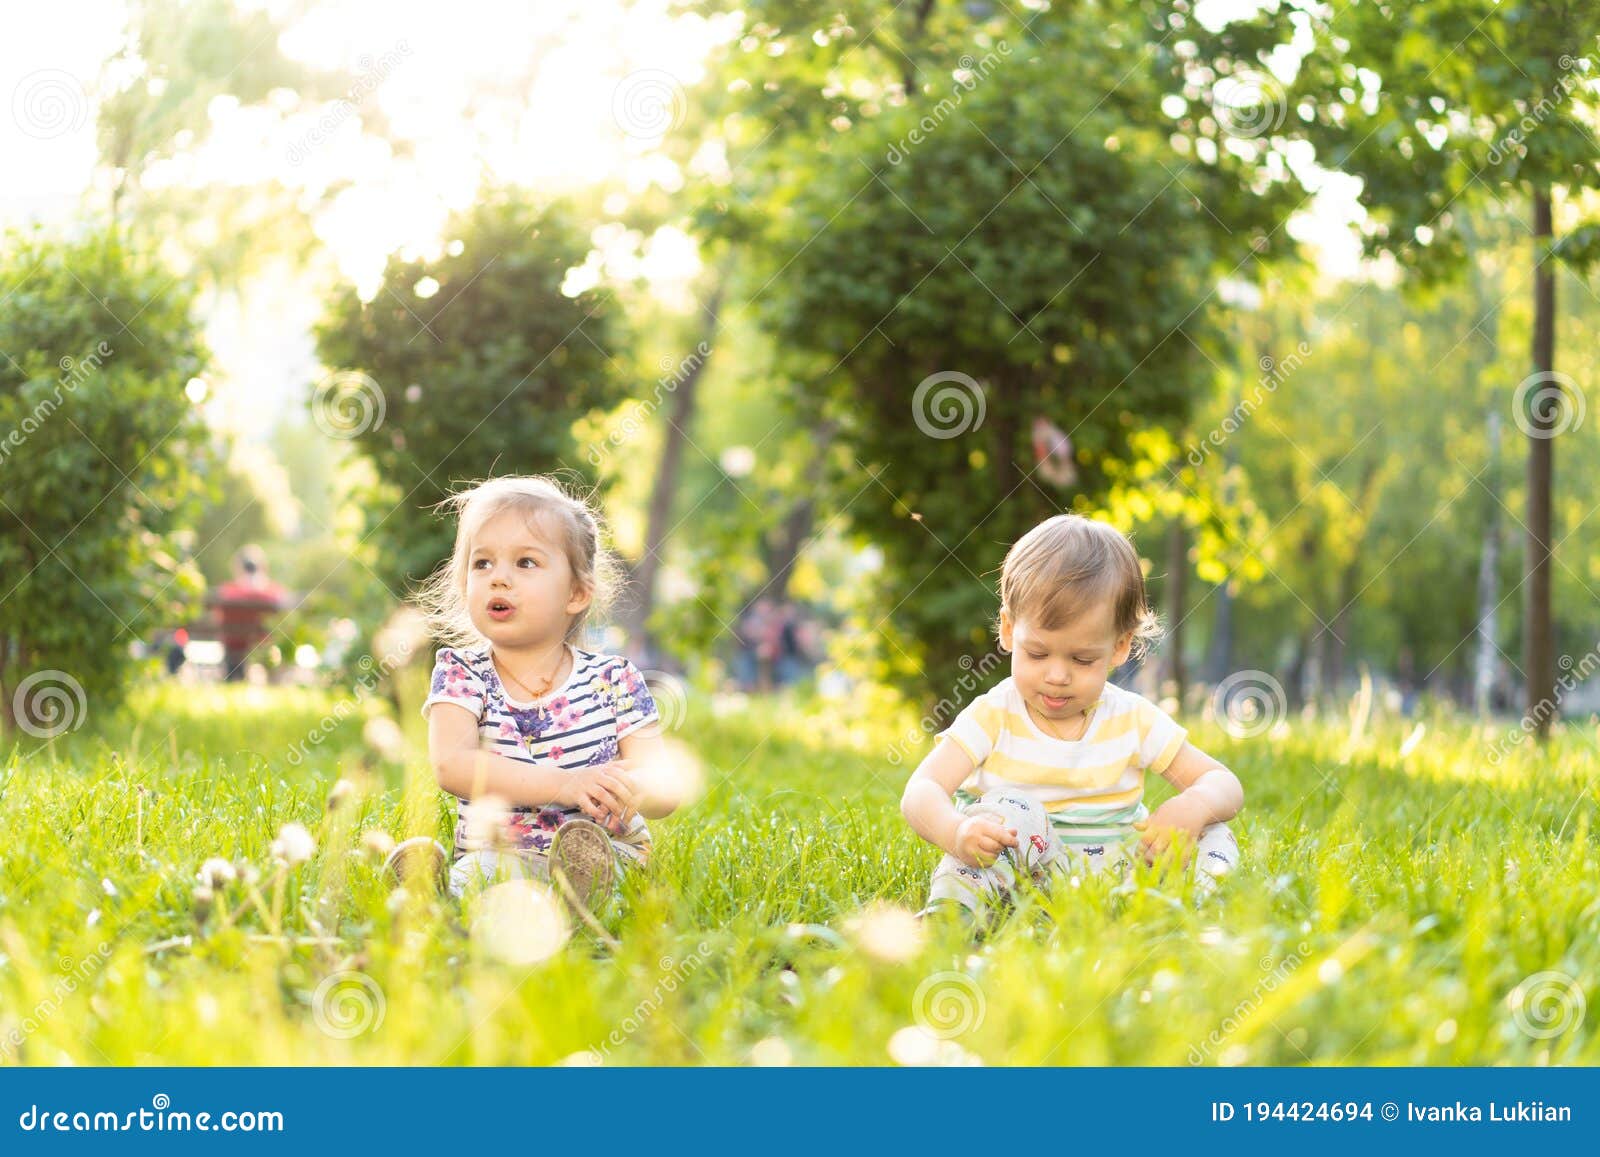 3 328 Cute Twins Boy Girl Photos Free Royalty Free Stock Photos From Dreamstime